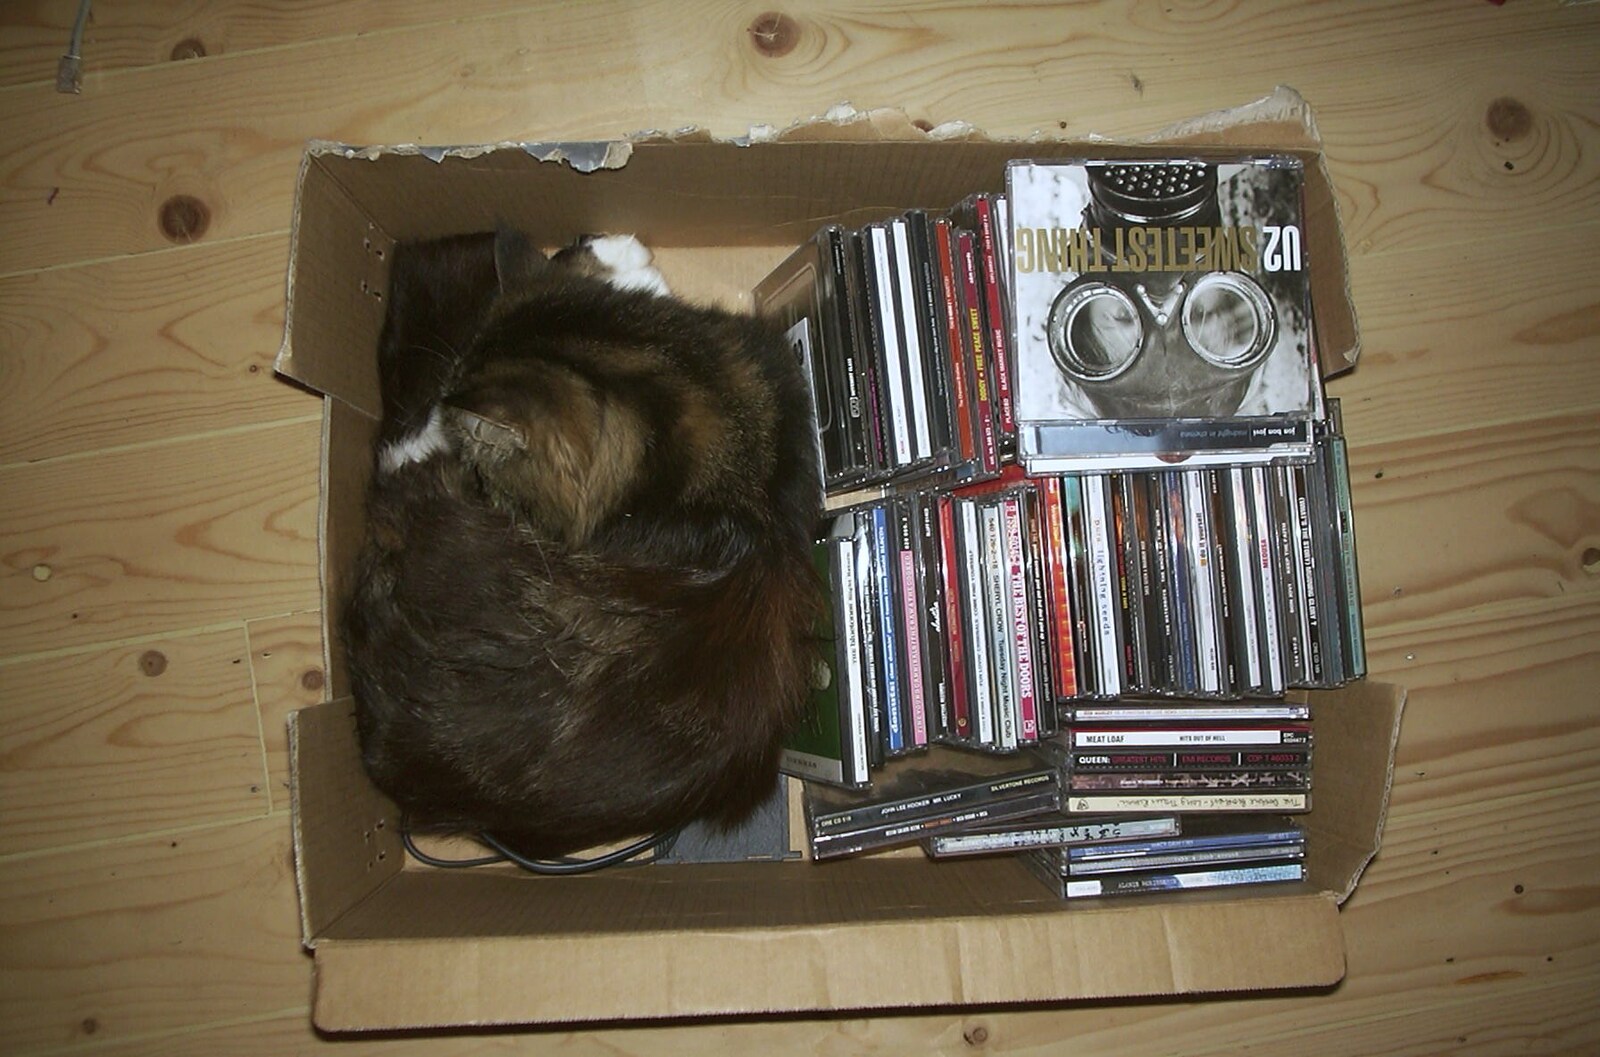 Sophie sleeps in a box, with a load of CDs from June Randomness, Brome, Suffolk - 15th June 2001